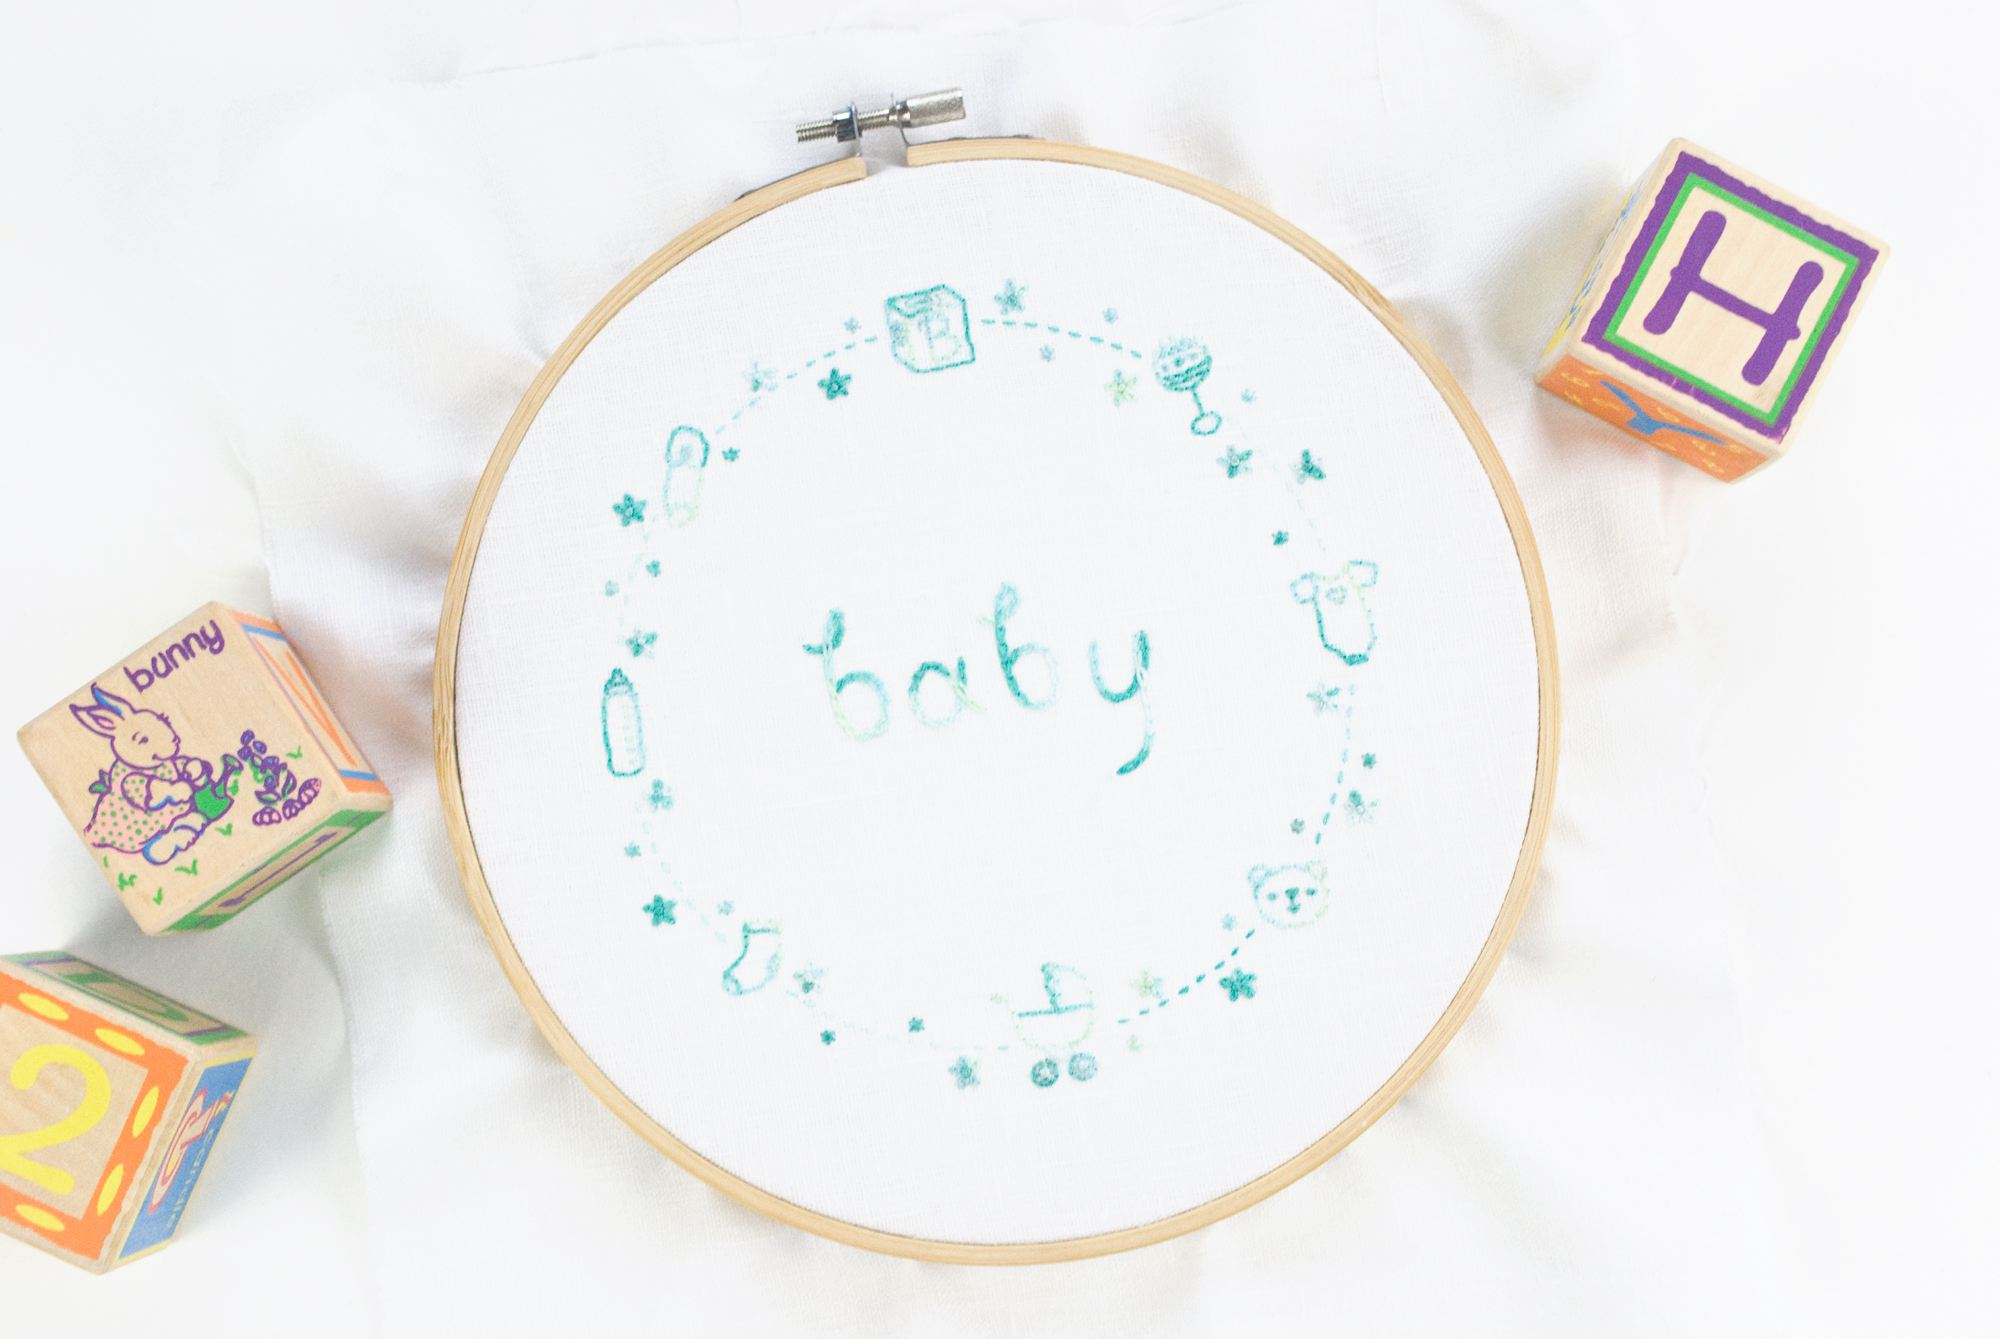 Funny Embroidery Patterns Our Top 25 Free Embroidery Designs